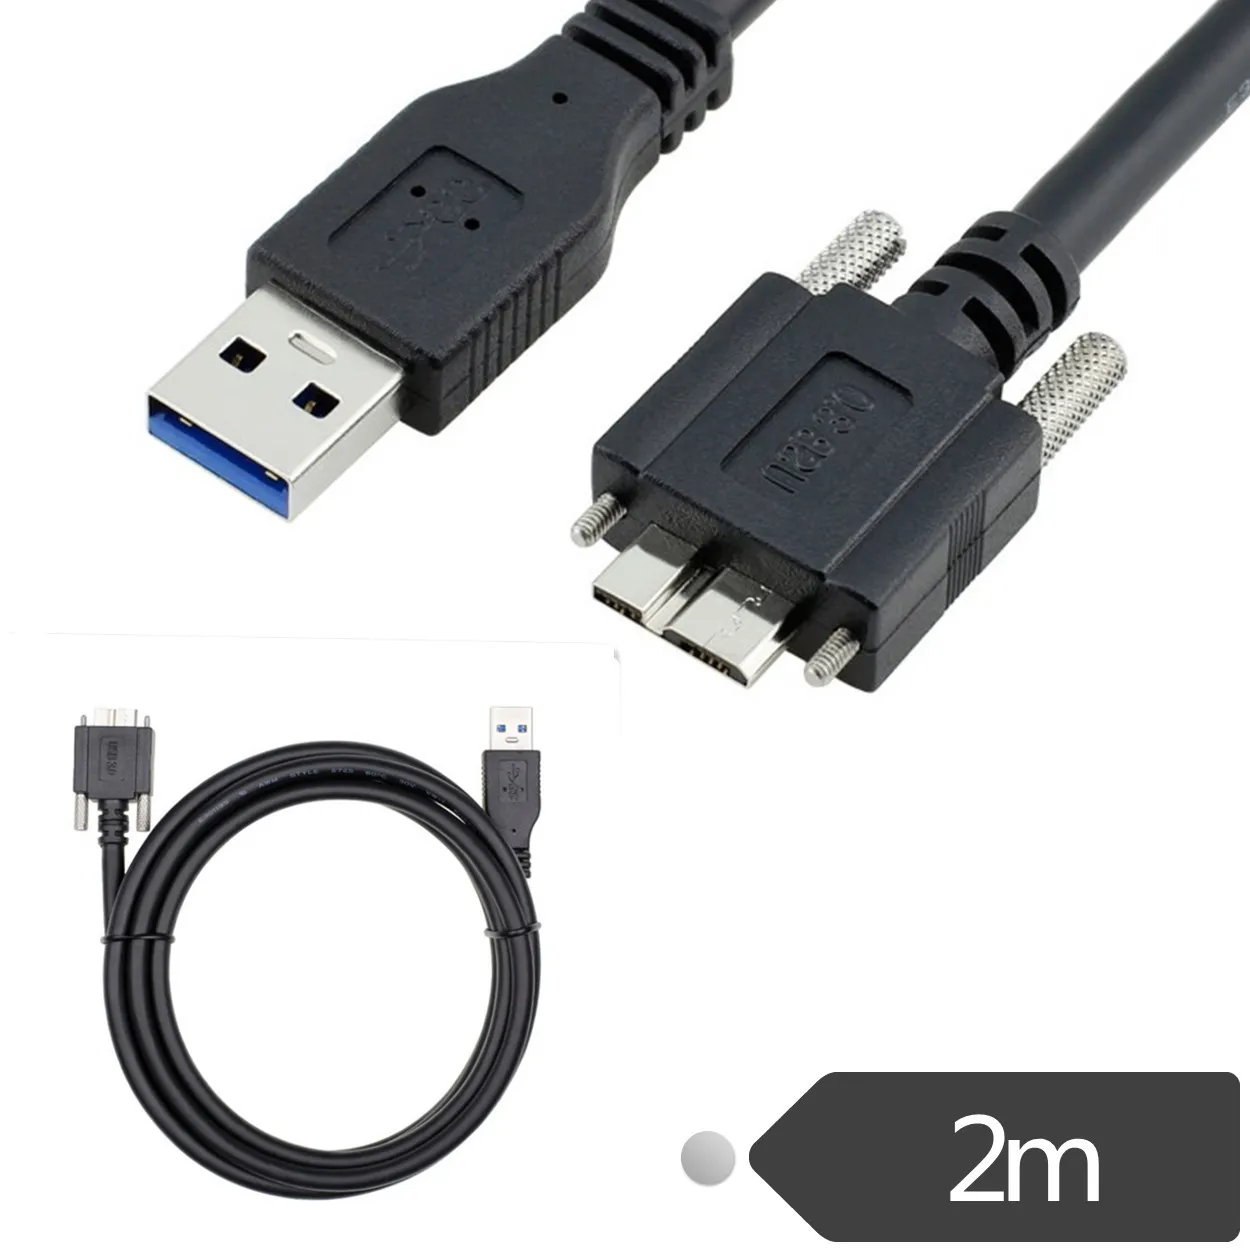 Hot Sale Usb 3.0 A Type Male To Micro B Male Extension Camera Cable Usb3.0  Am/microb Cord 1m 1.5m 2m 3m 5m With Locking Screws - Buy Usb 3.0 A Type  Male